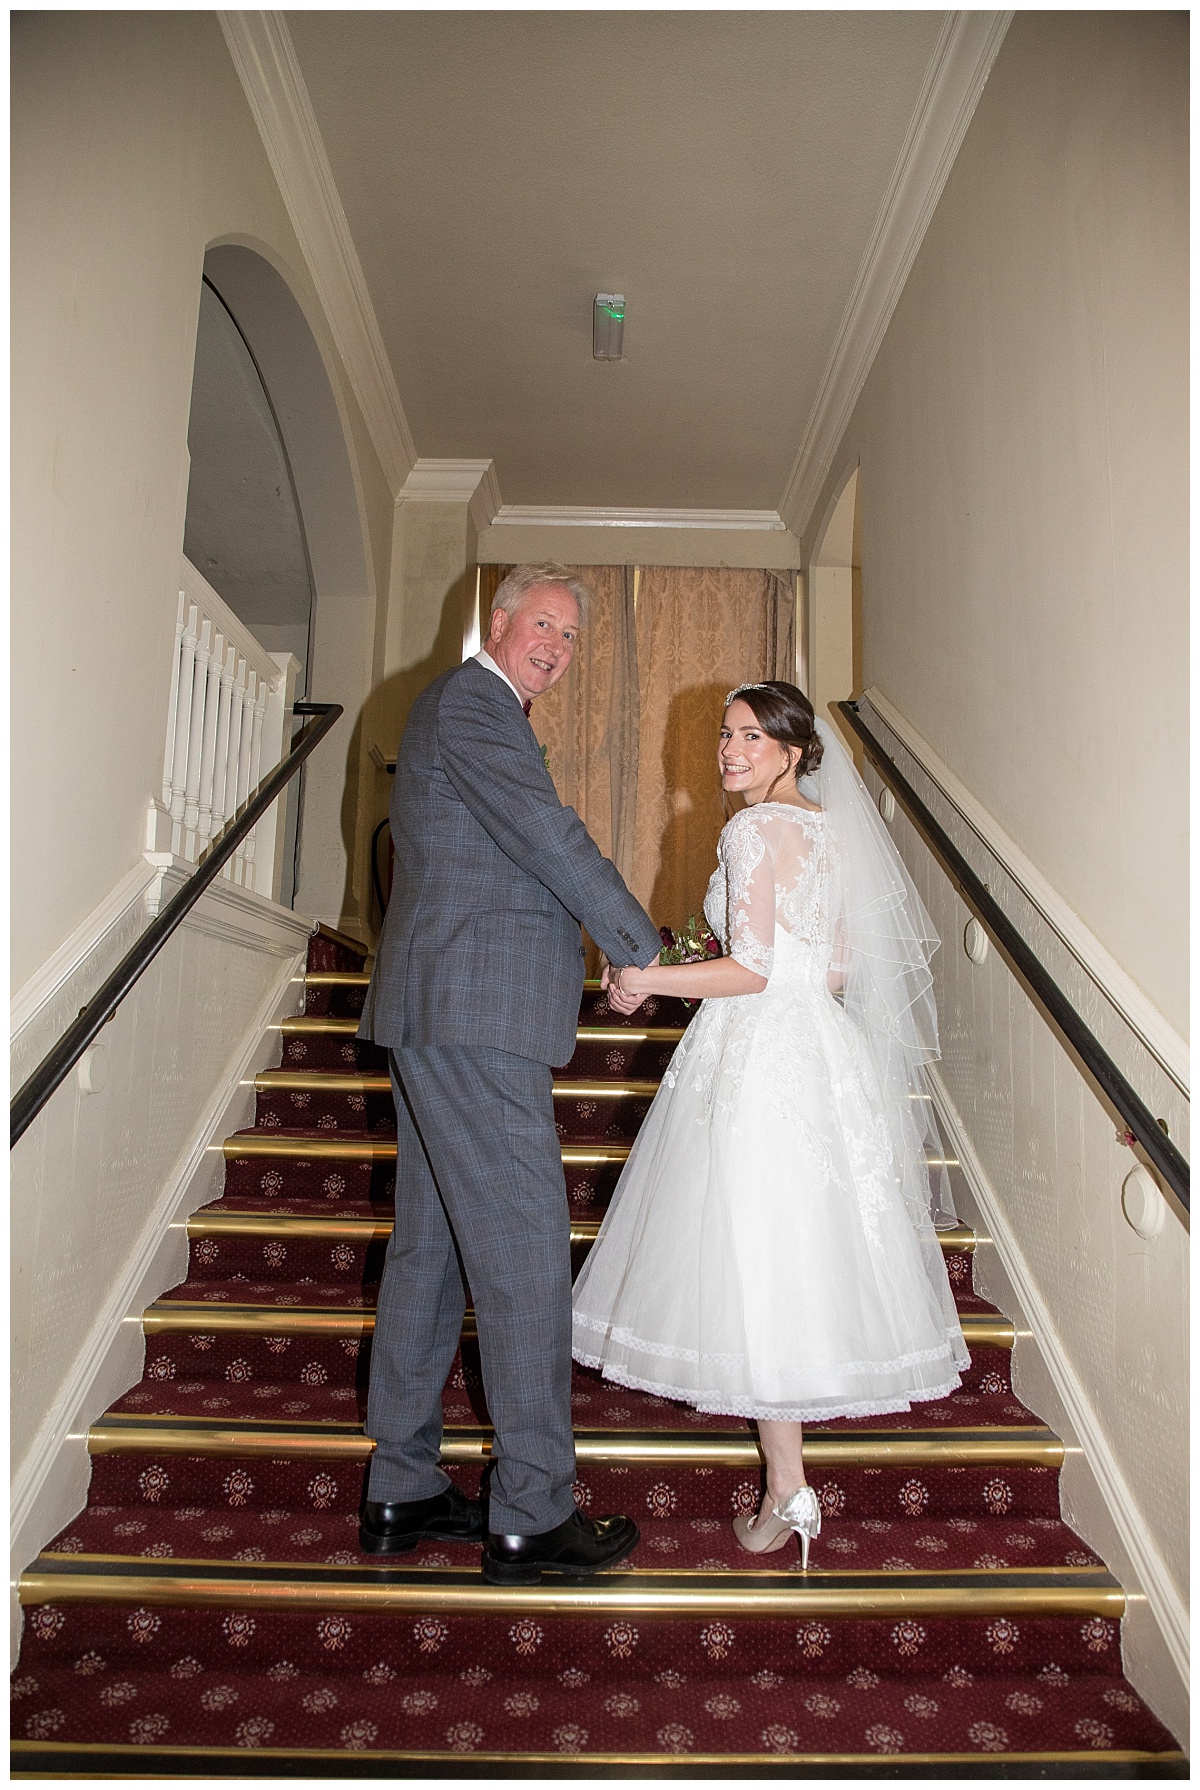 Wedding Photography Manchester - Holly and Mats Bowdon Rooms wedding day 23